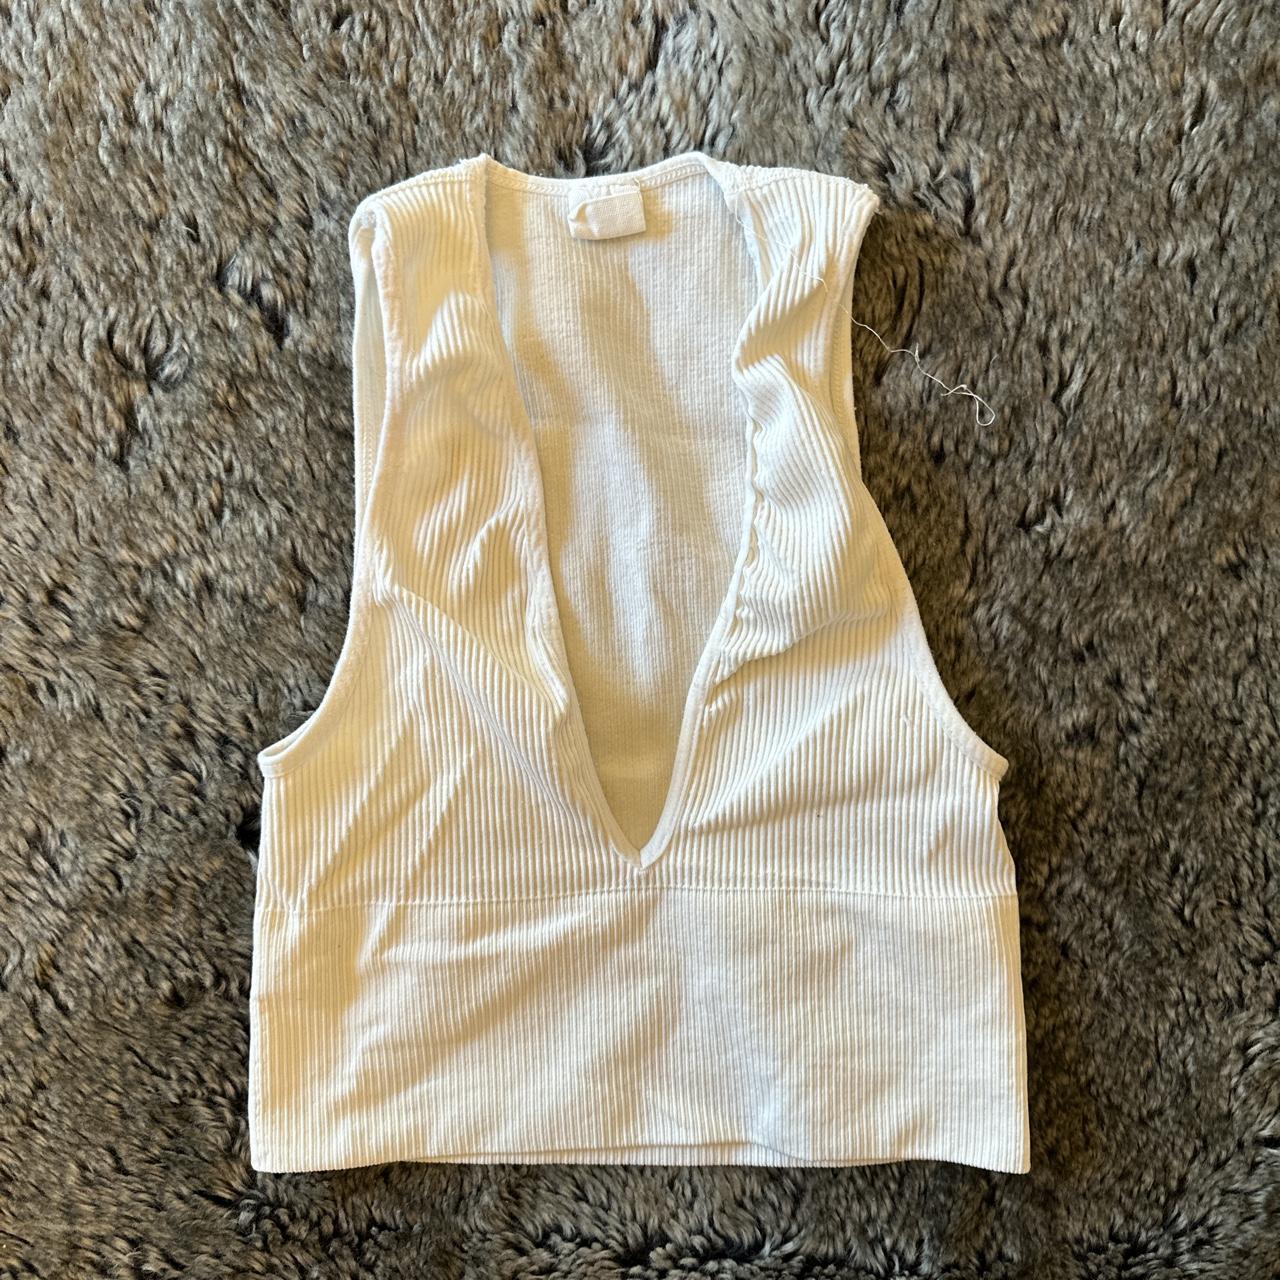 Urban outfitters josie ribbed v-neck vest in... - Depop